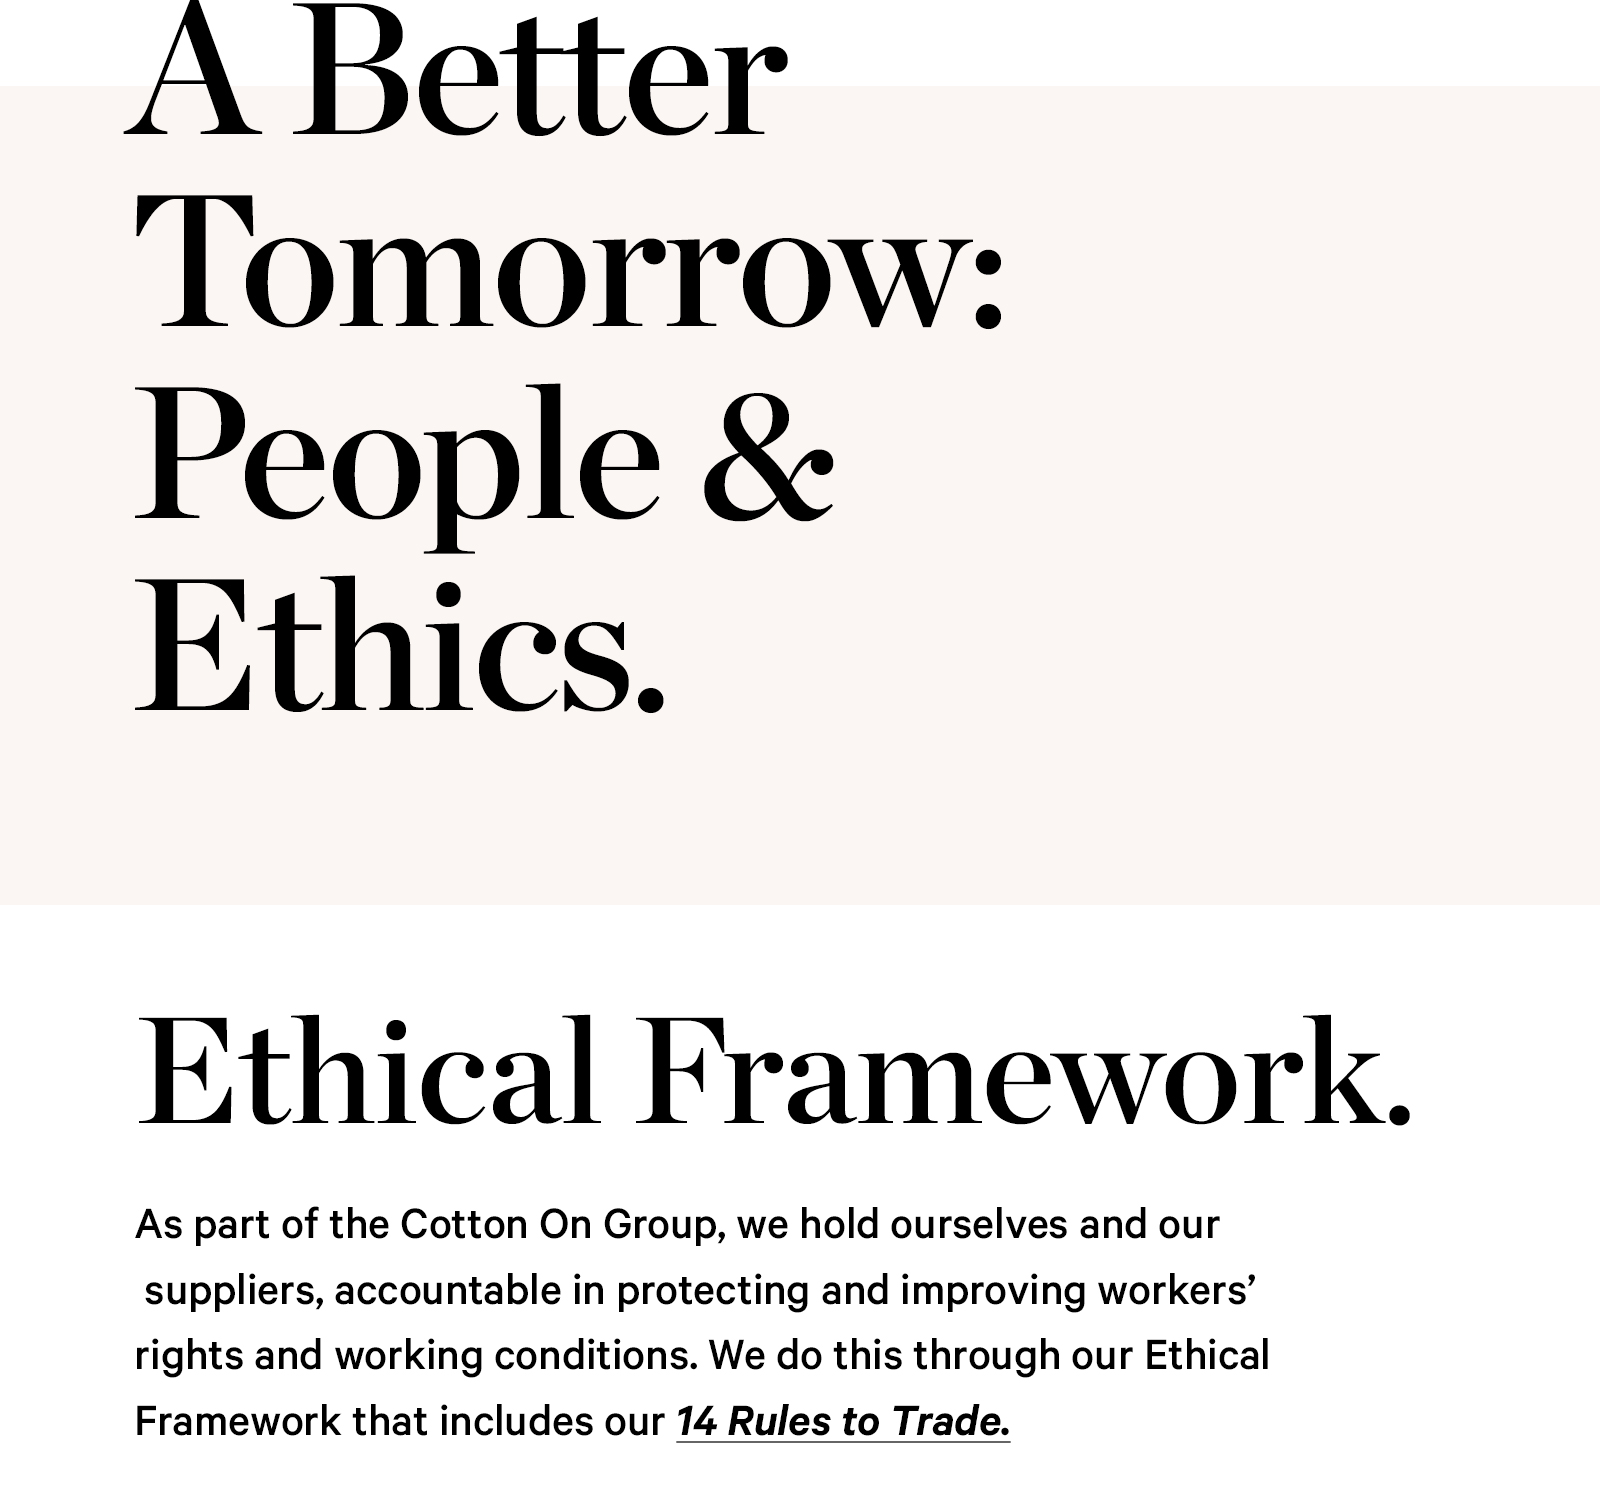 A Better Tomorrow - People & Ethics 